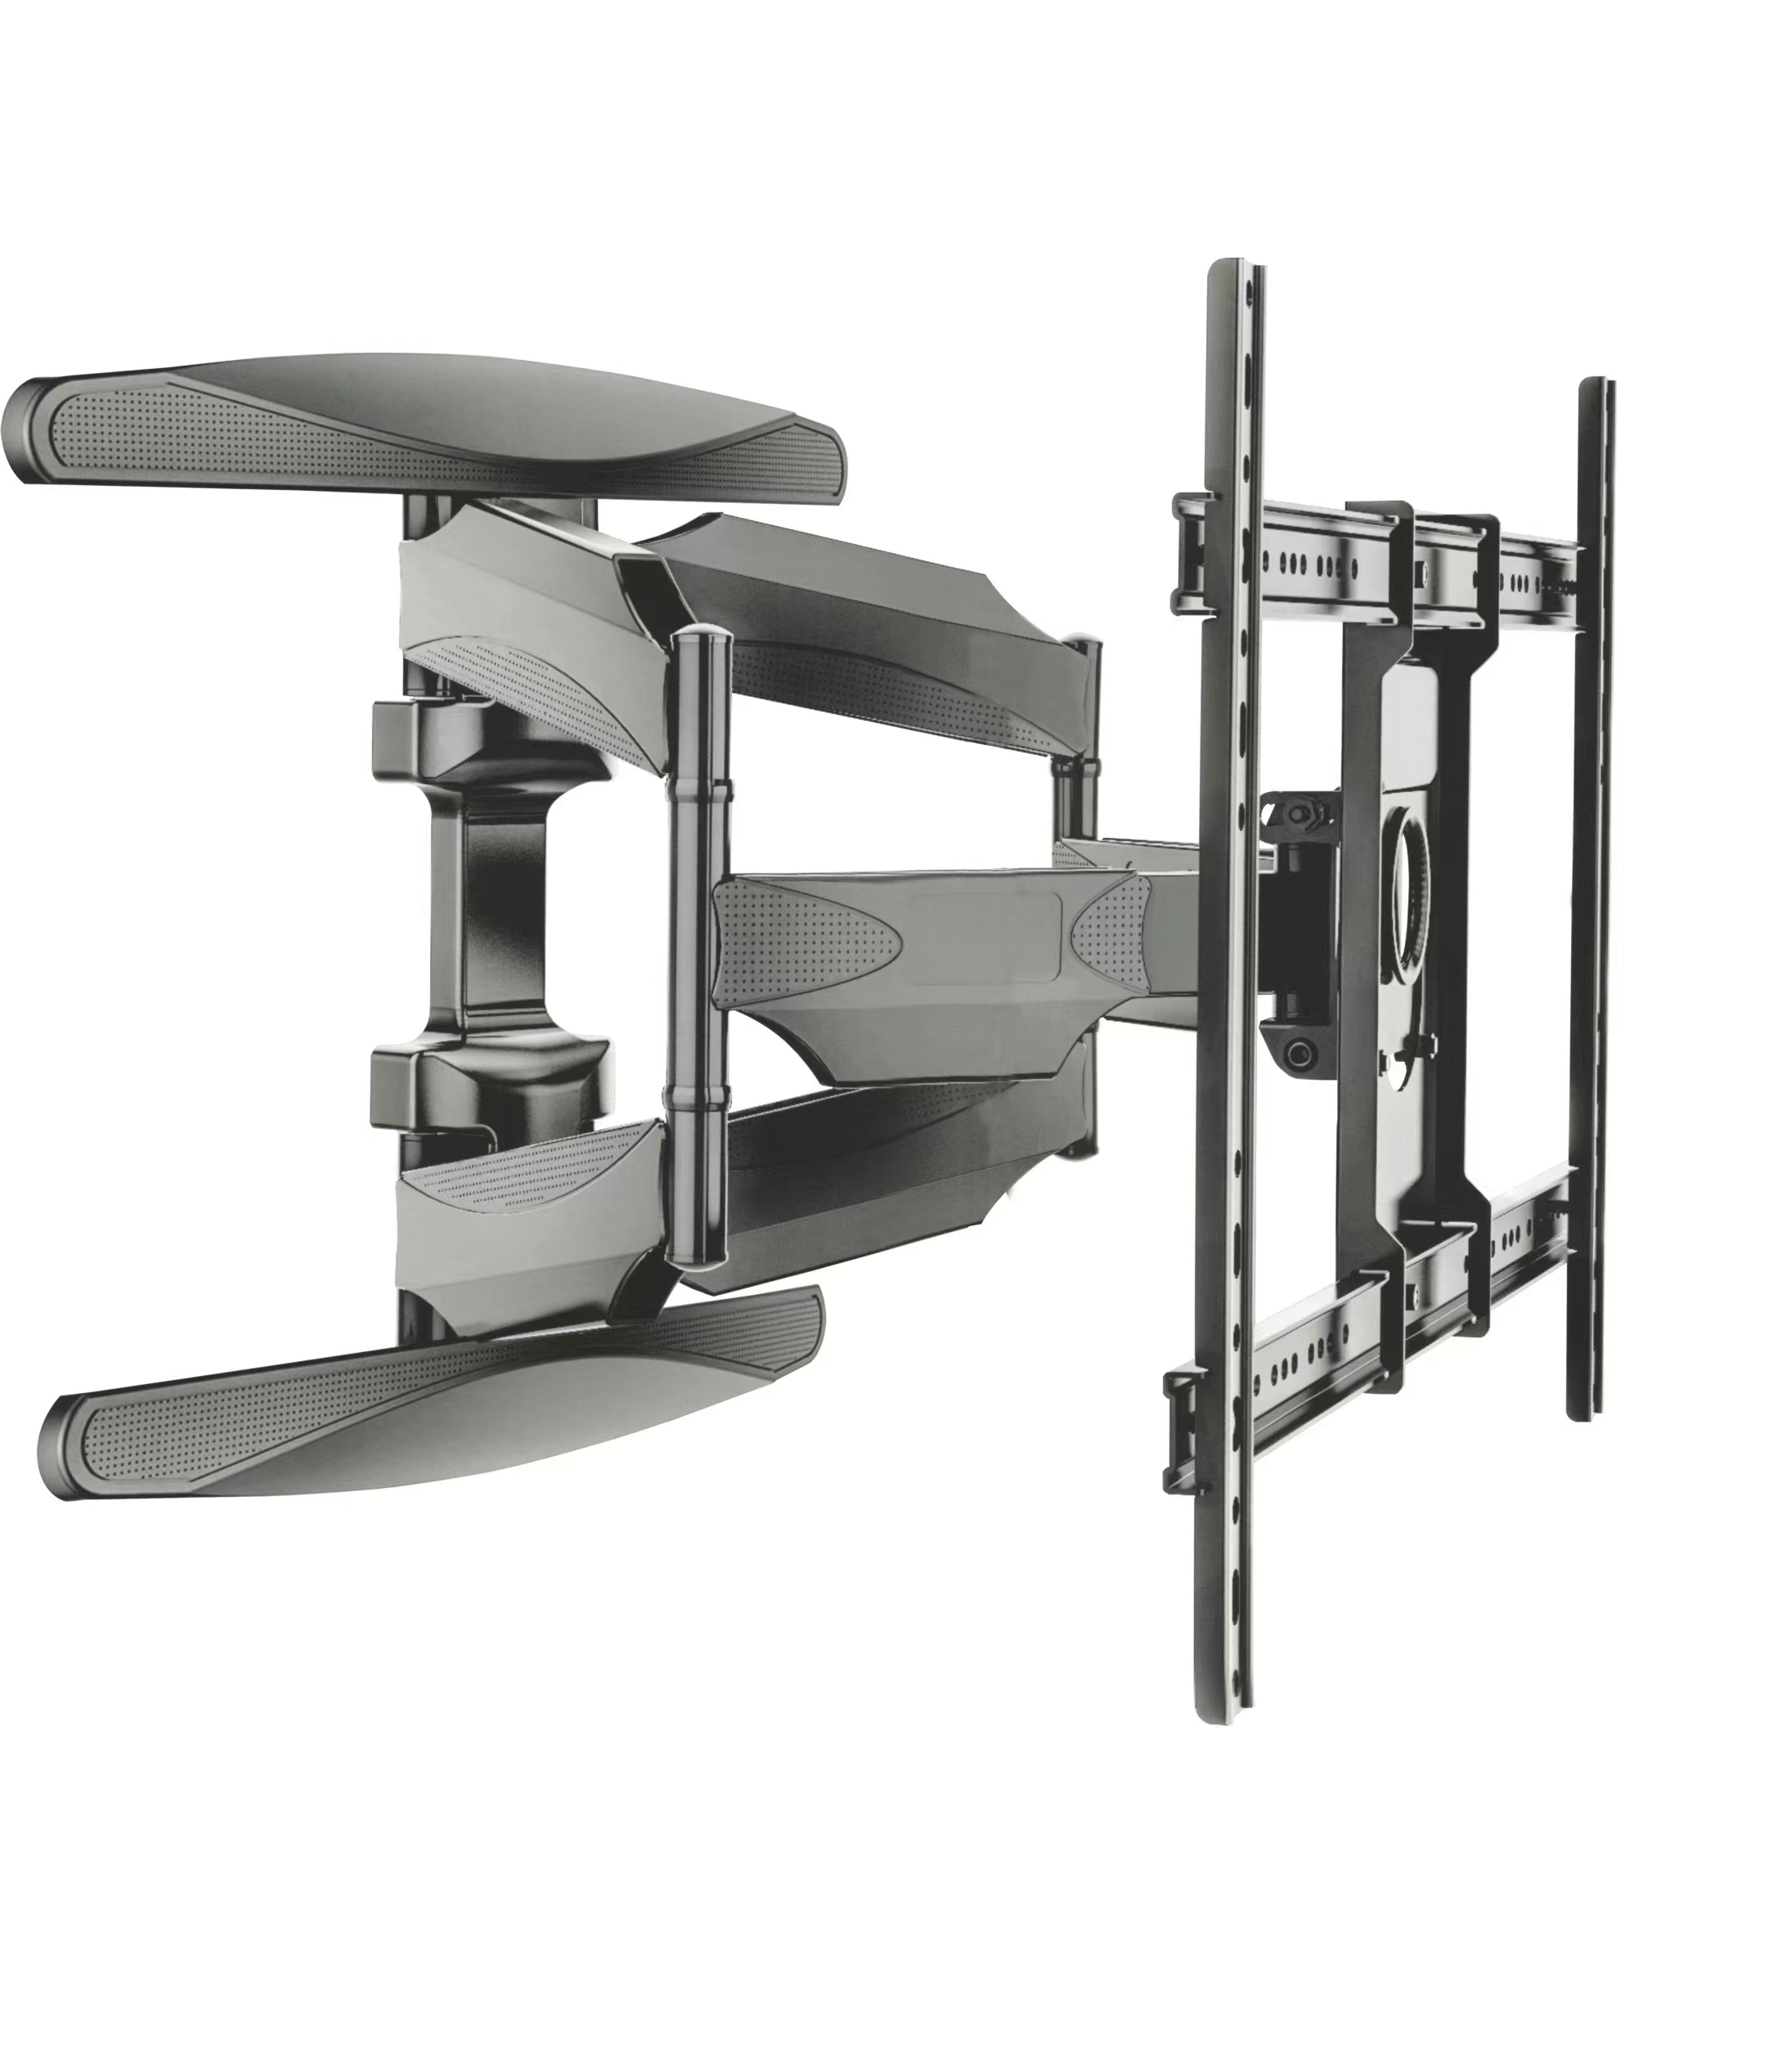 TV Wall Mount - P65 - Movable - 55-85 inch